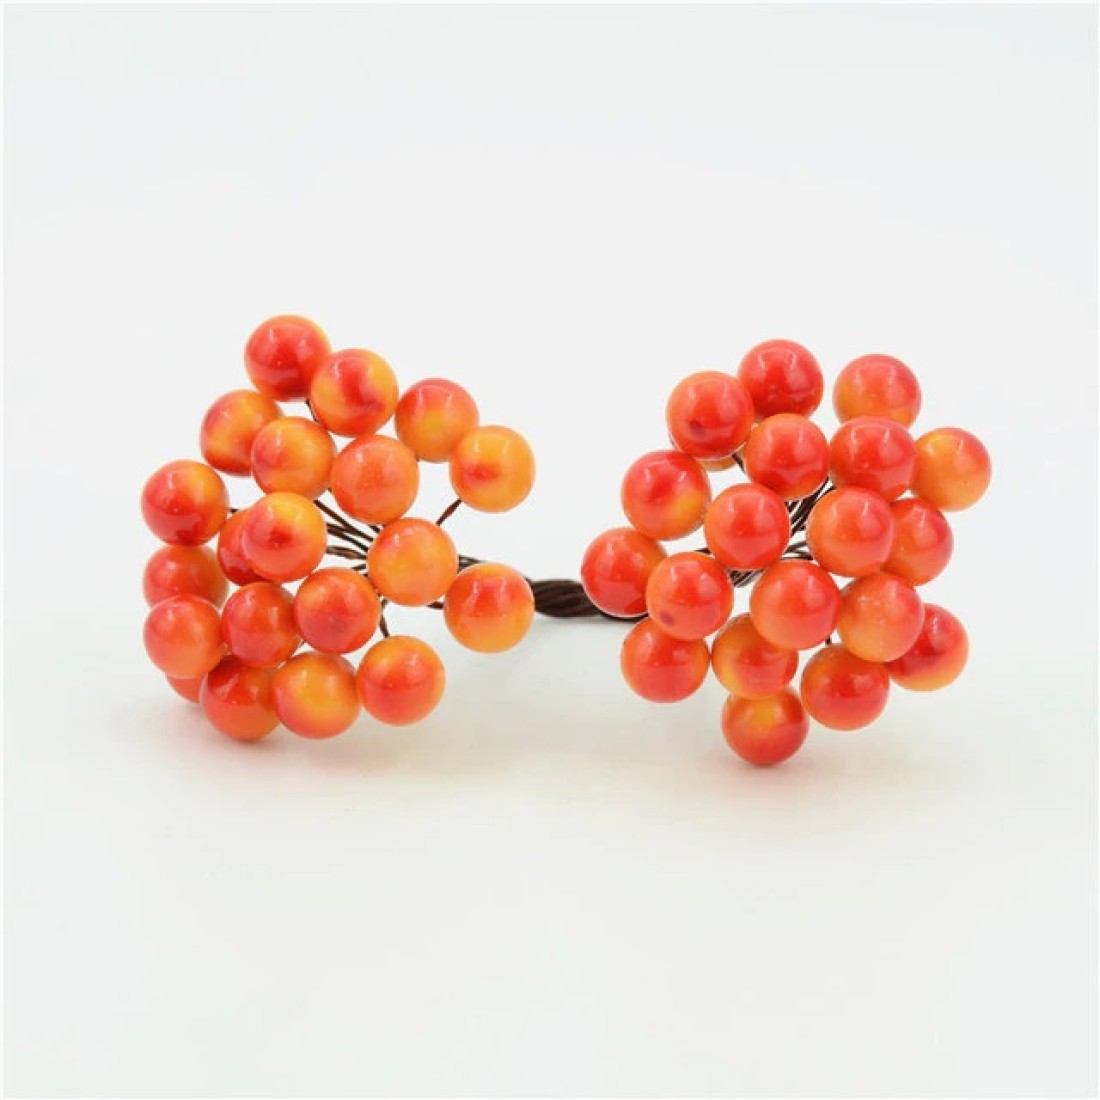 Craftyscrappers HOLLY BERRY POLLENS - ORANGE